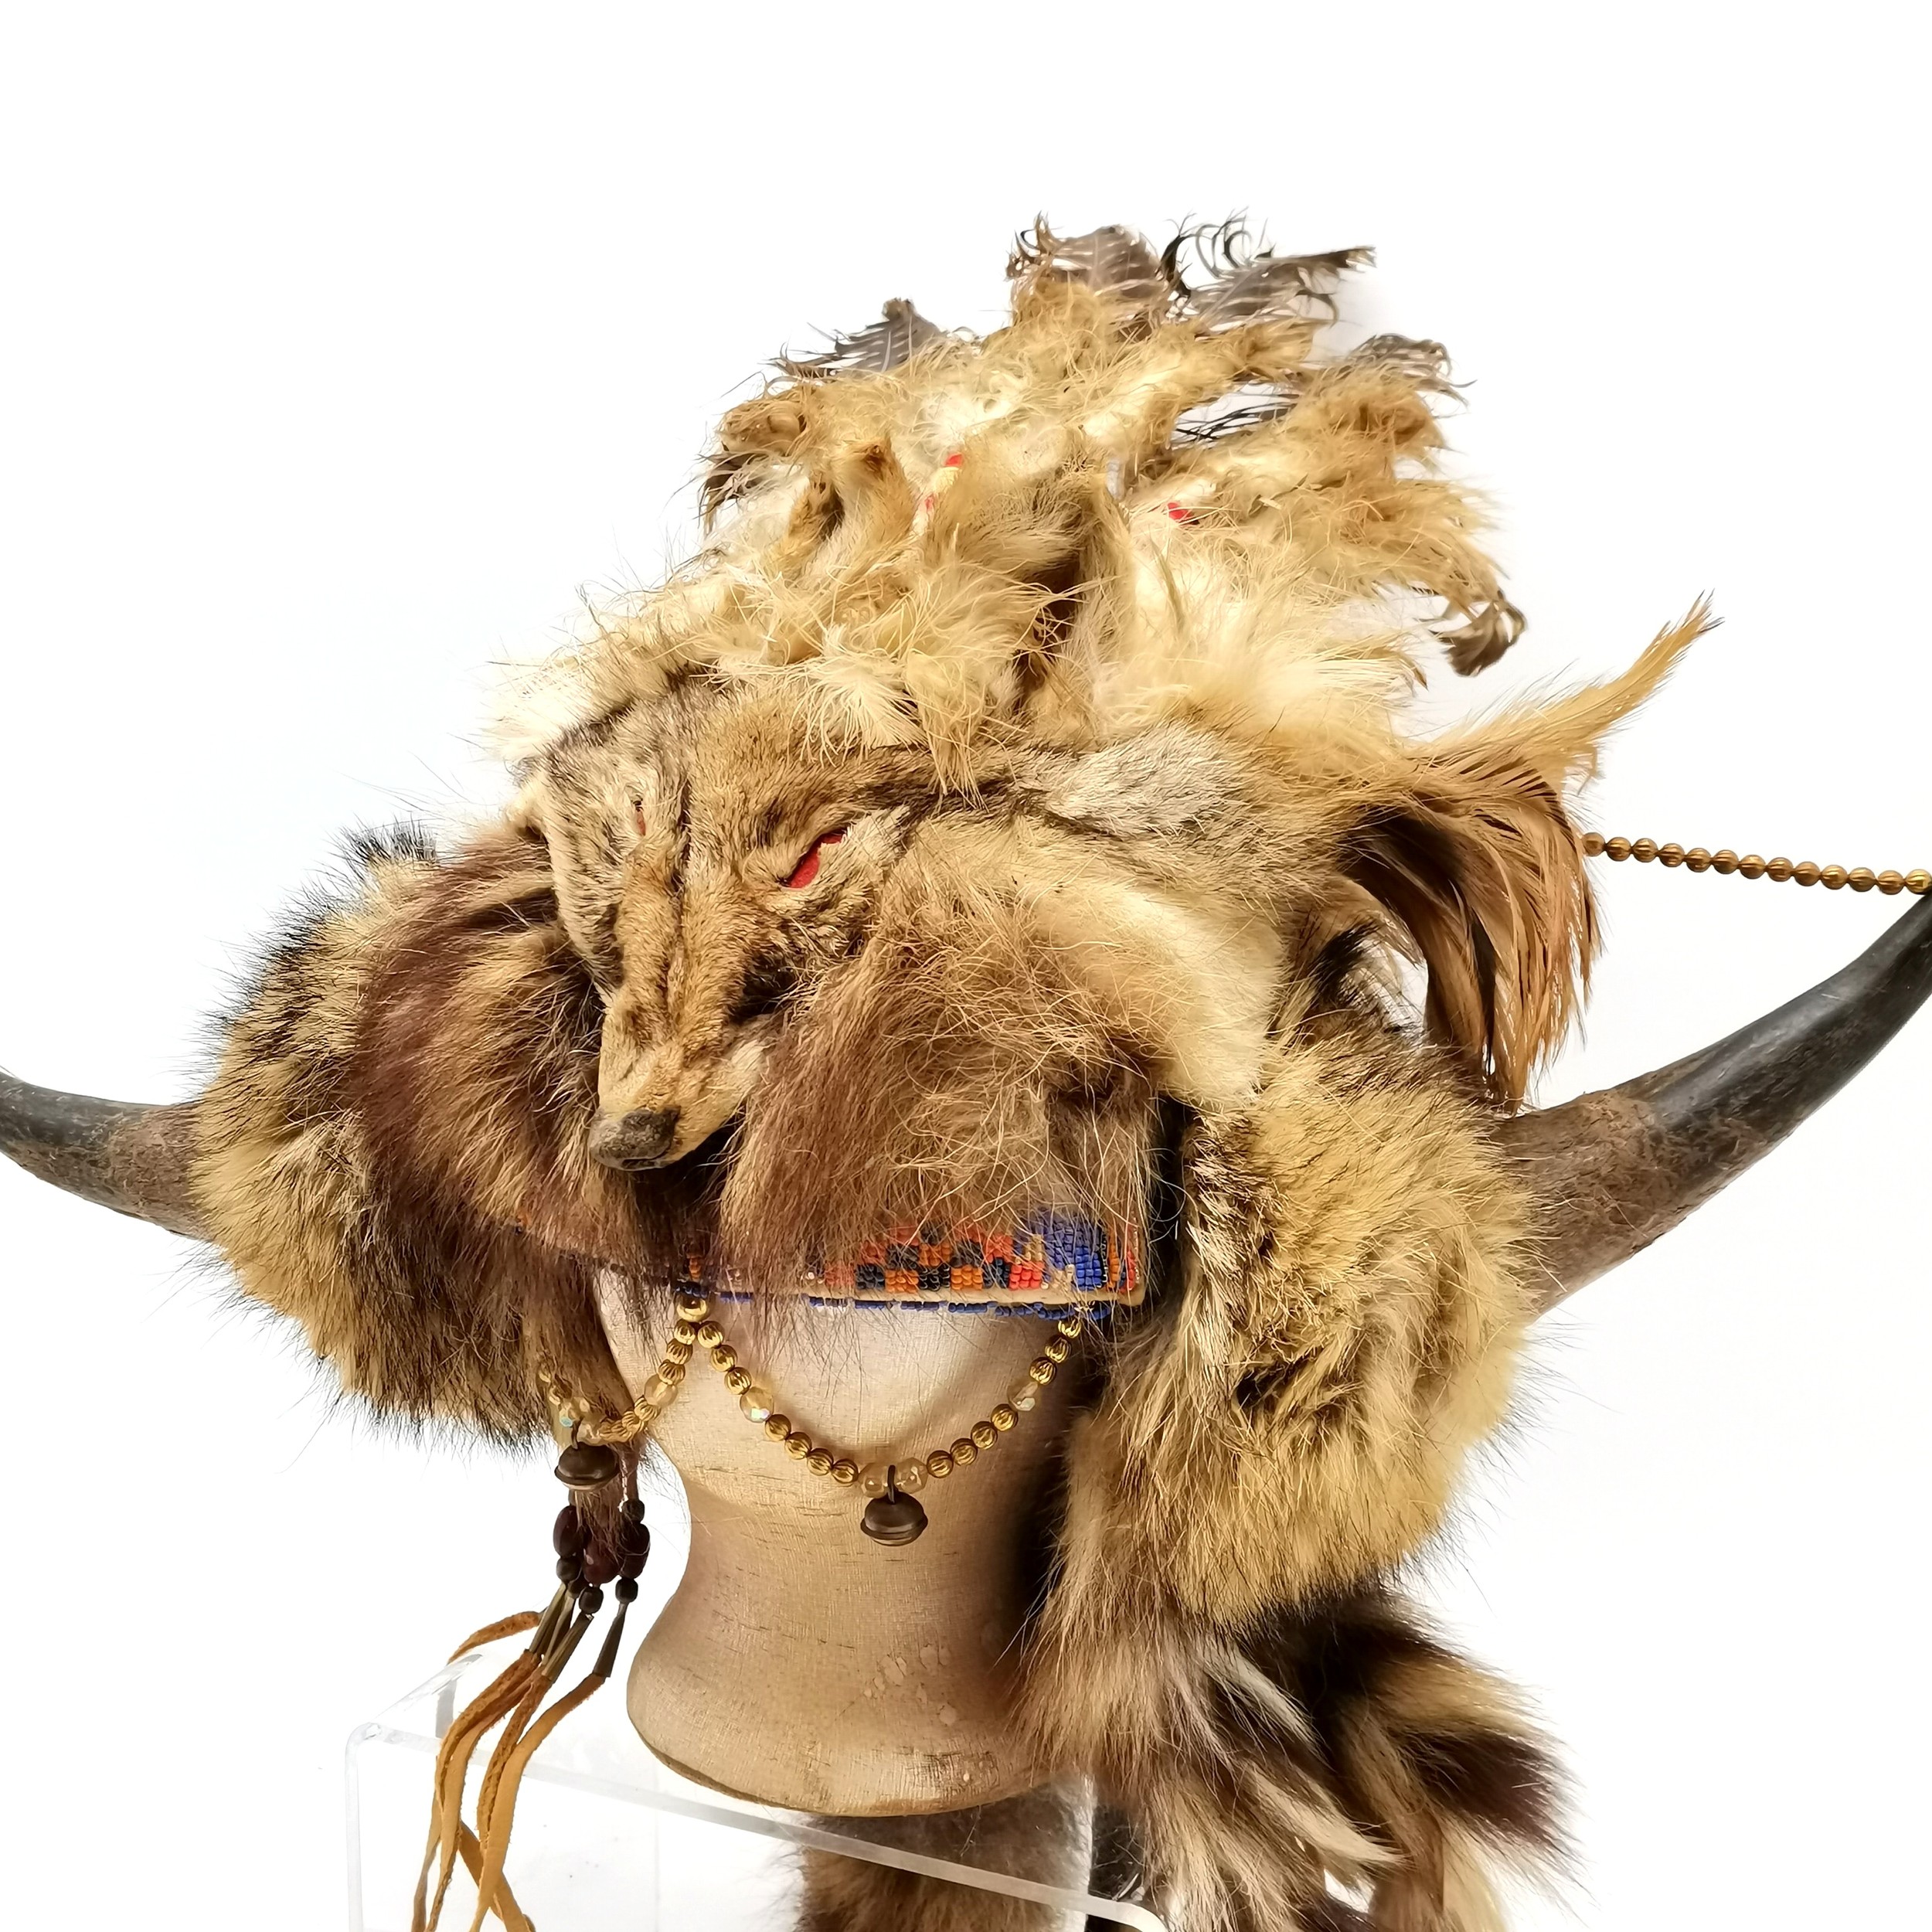 Native North American Indian shaman head-dress & stick rattle (68cm) with native beadwork decoration - Image 3 of 6